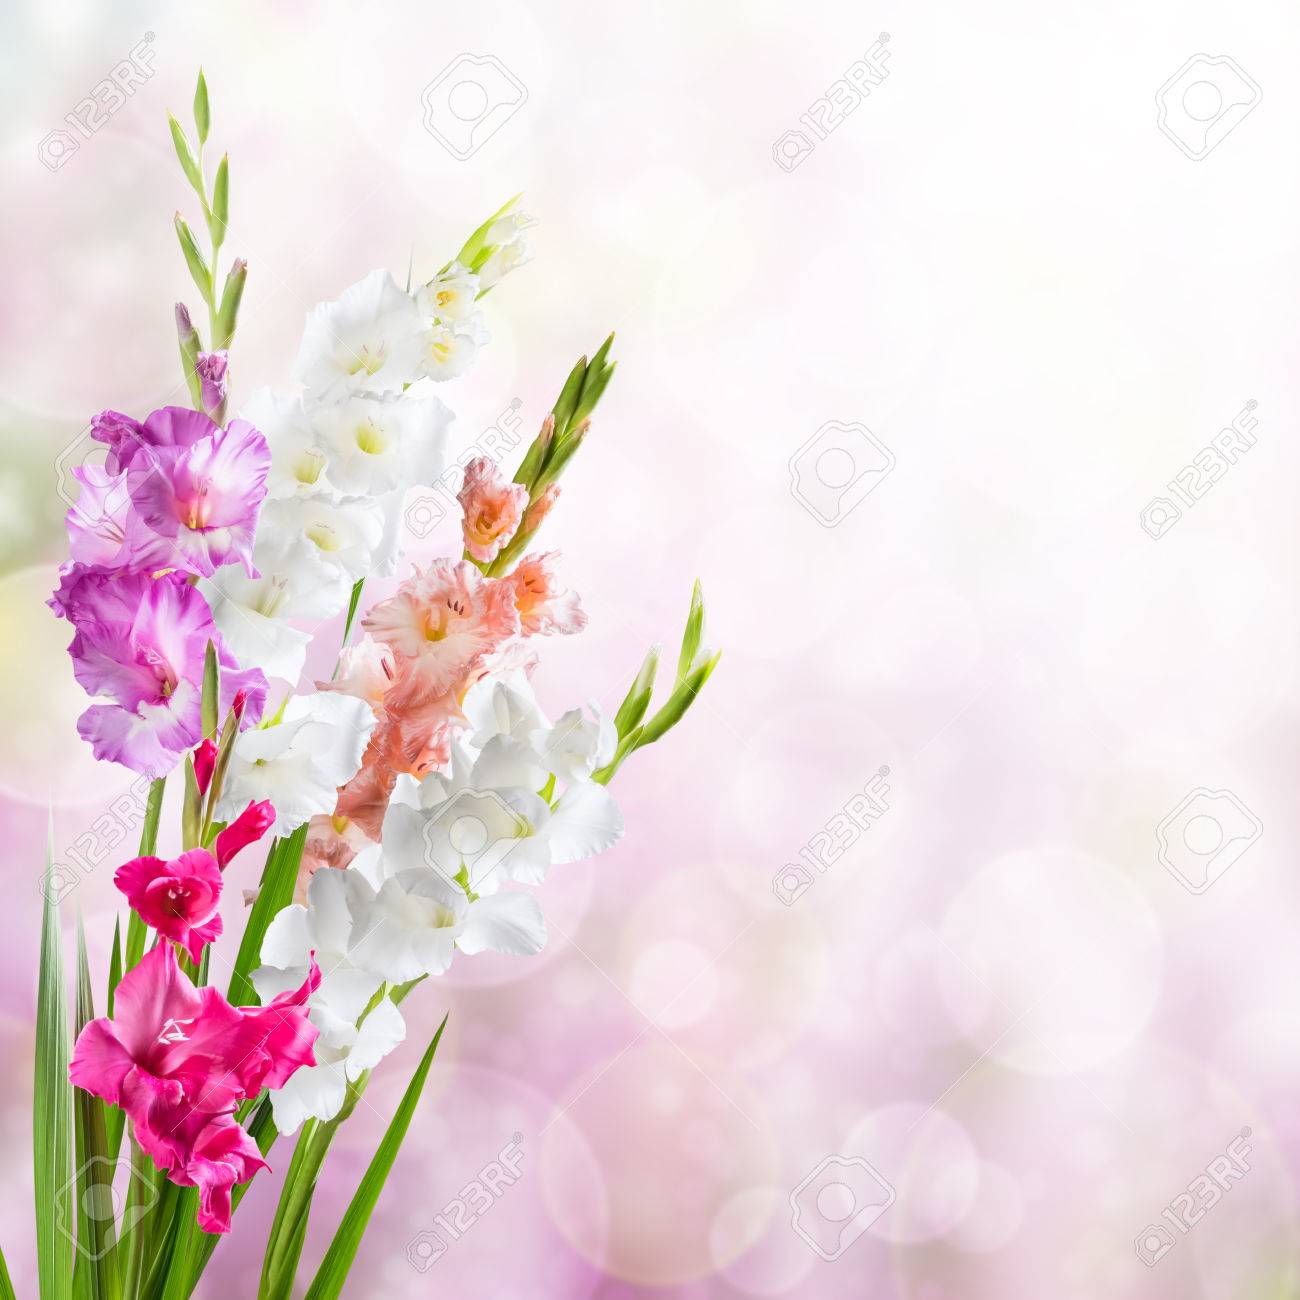 Beautiful Floral Nature Background Witn Gladiolus For Solemn